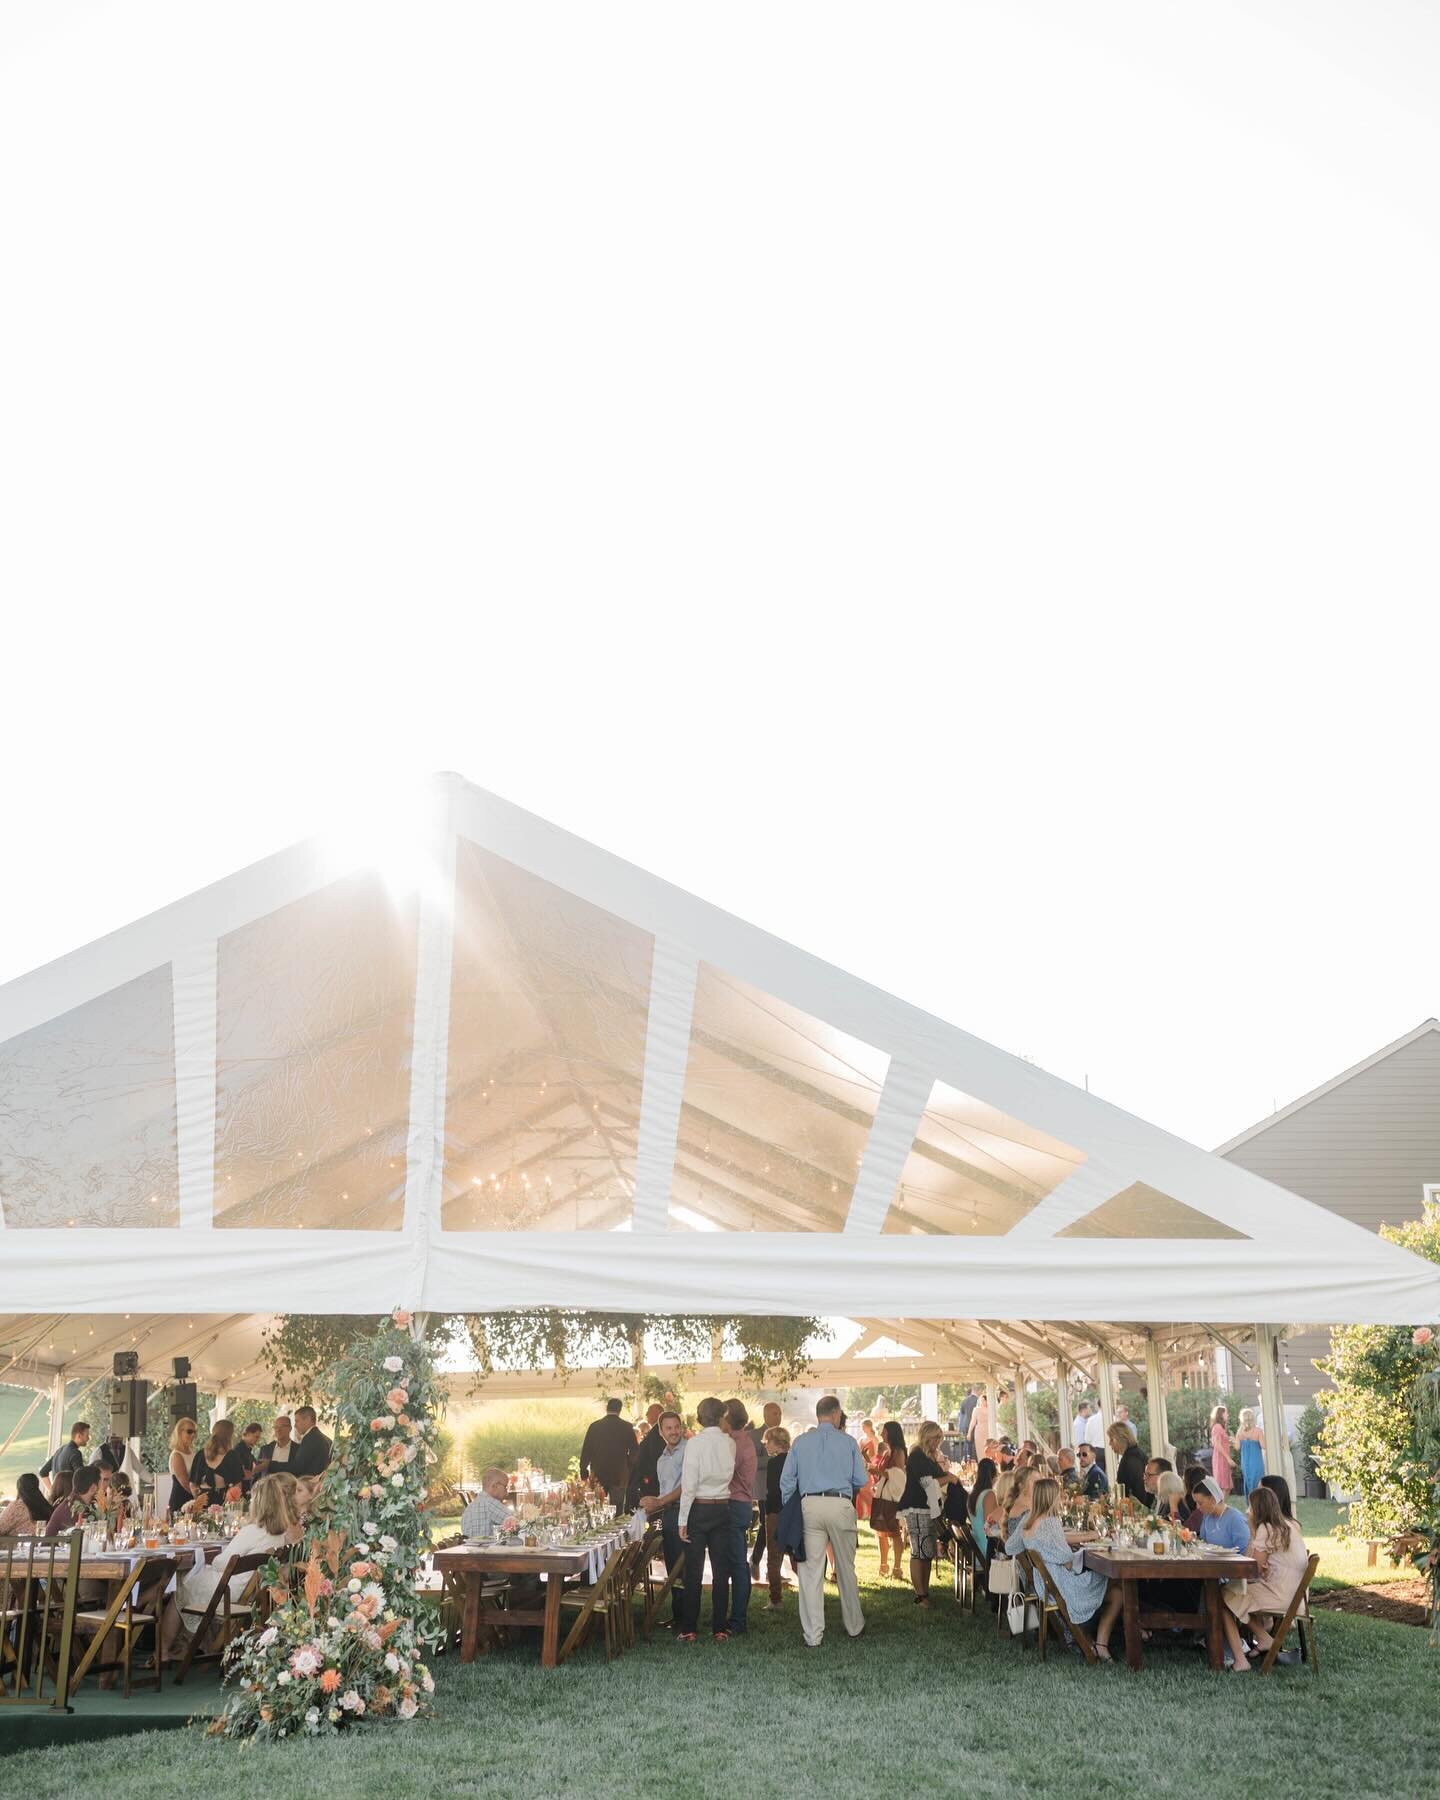 So many coastal inquires lately have me not only excited for summer, but also more beautiful tented receptions like this one.